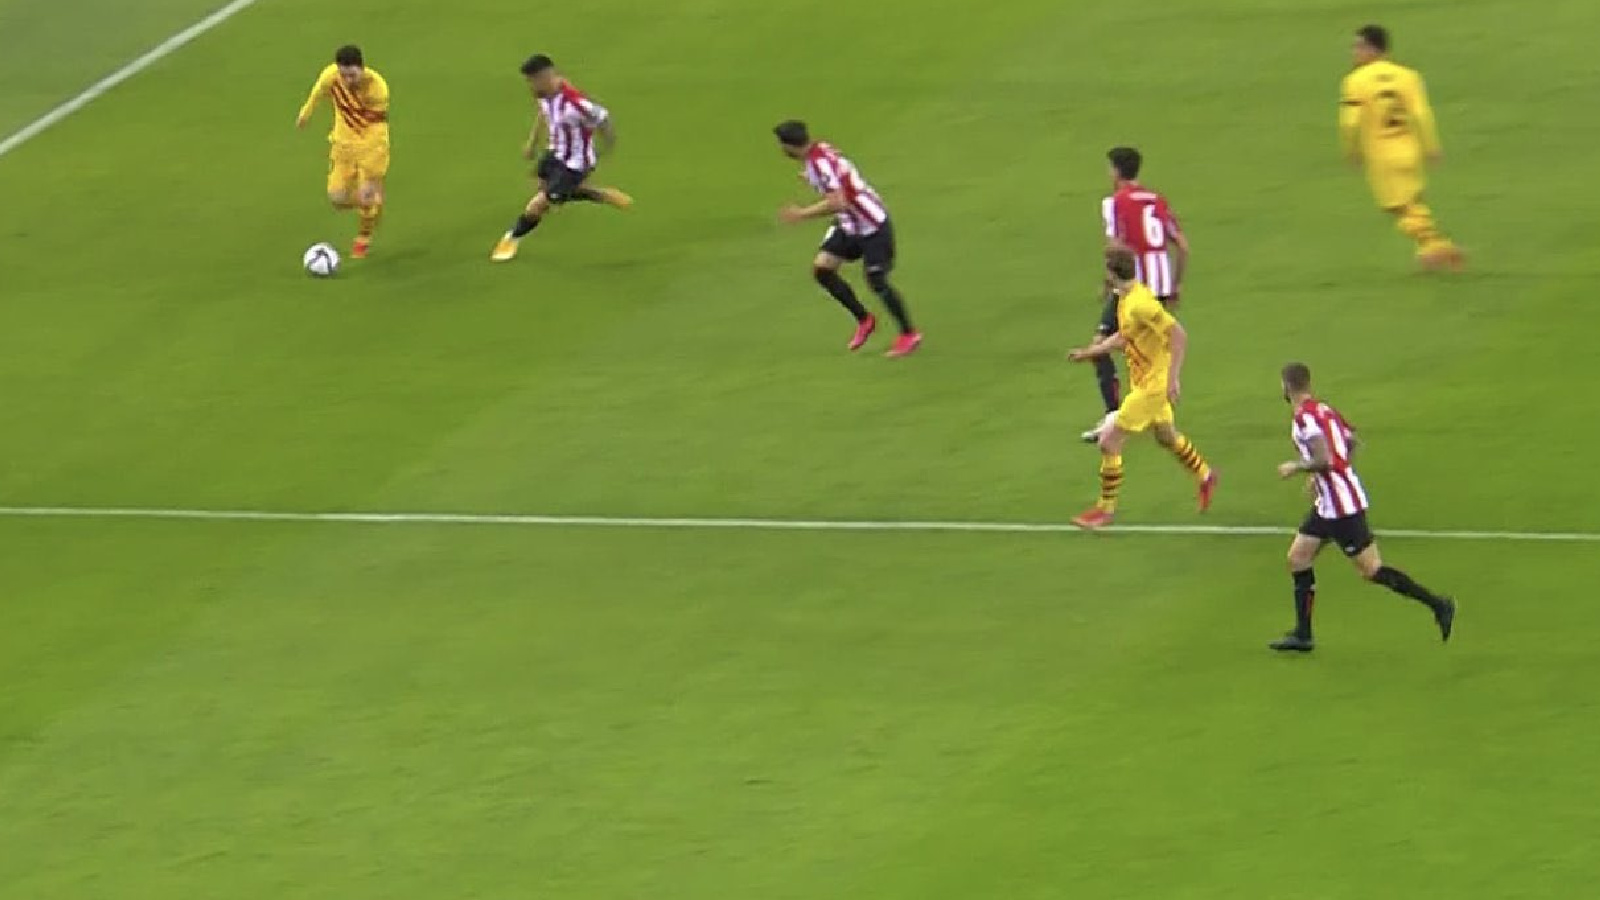 Video: Lionel Messi ultramarathons his way to a goal against Athletic Bilbao